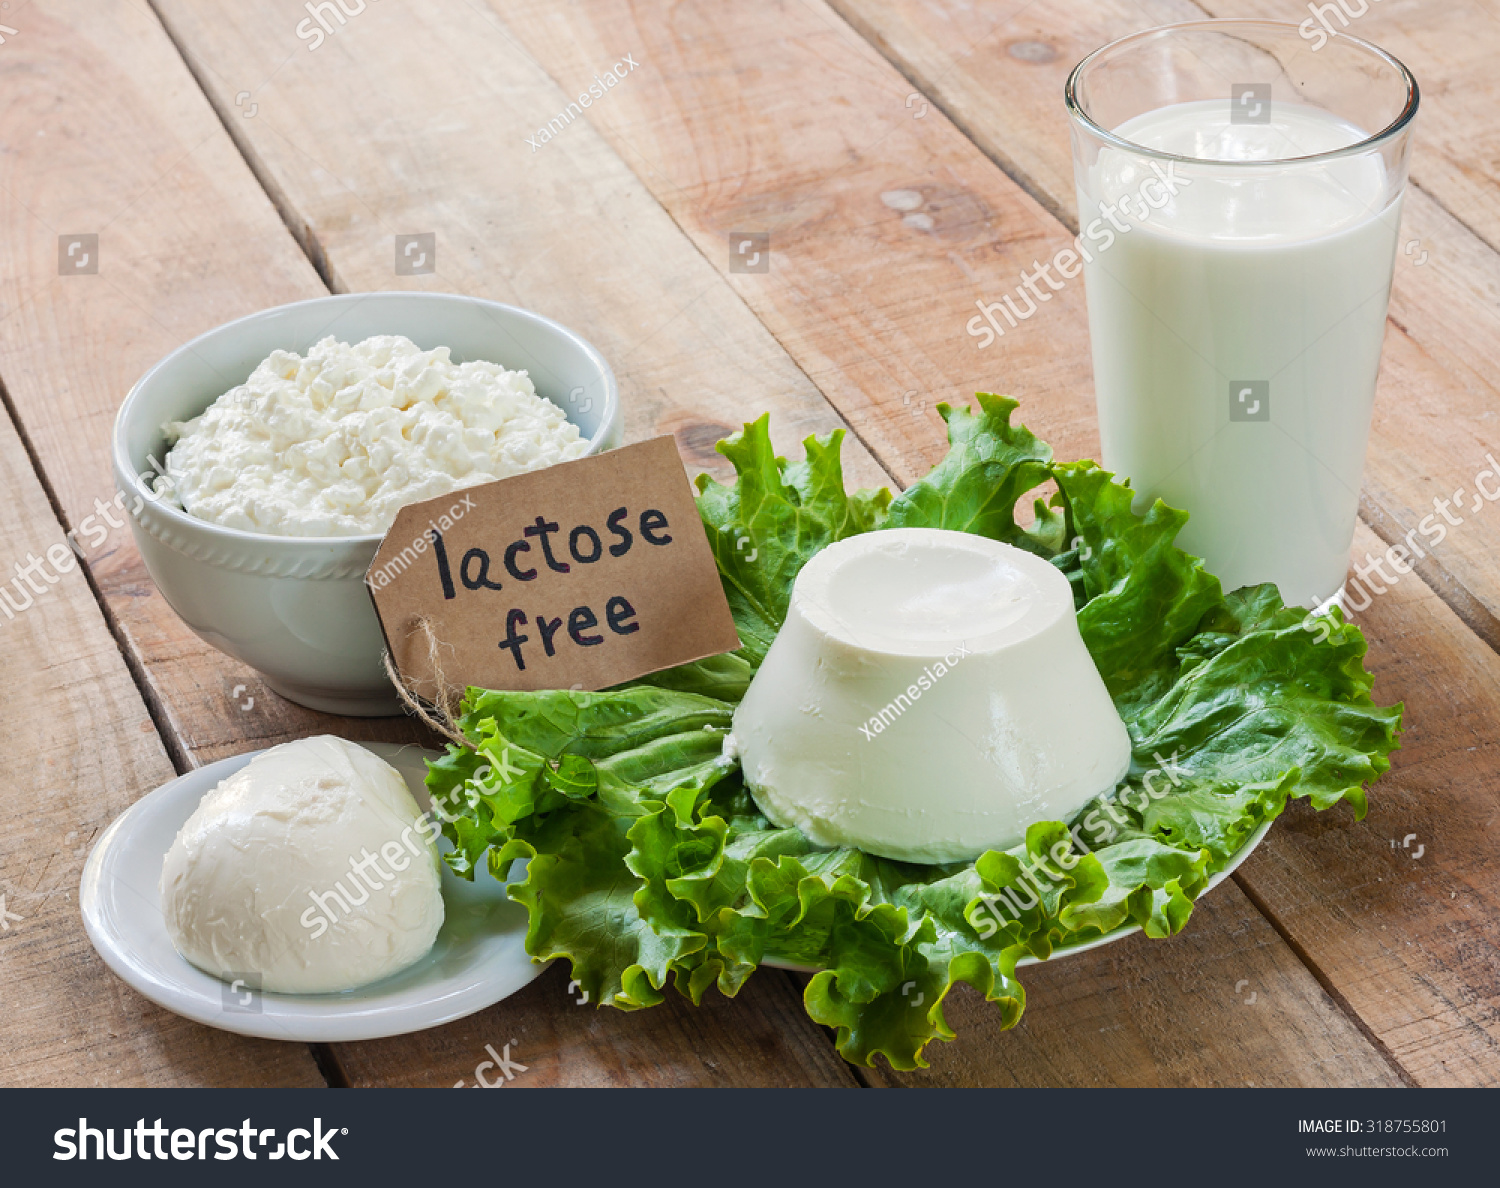 lactose free intolerance - food with background #318755801